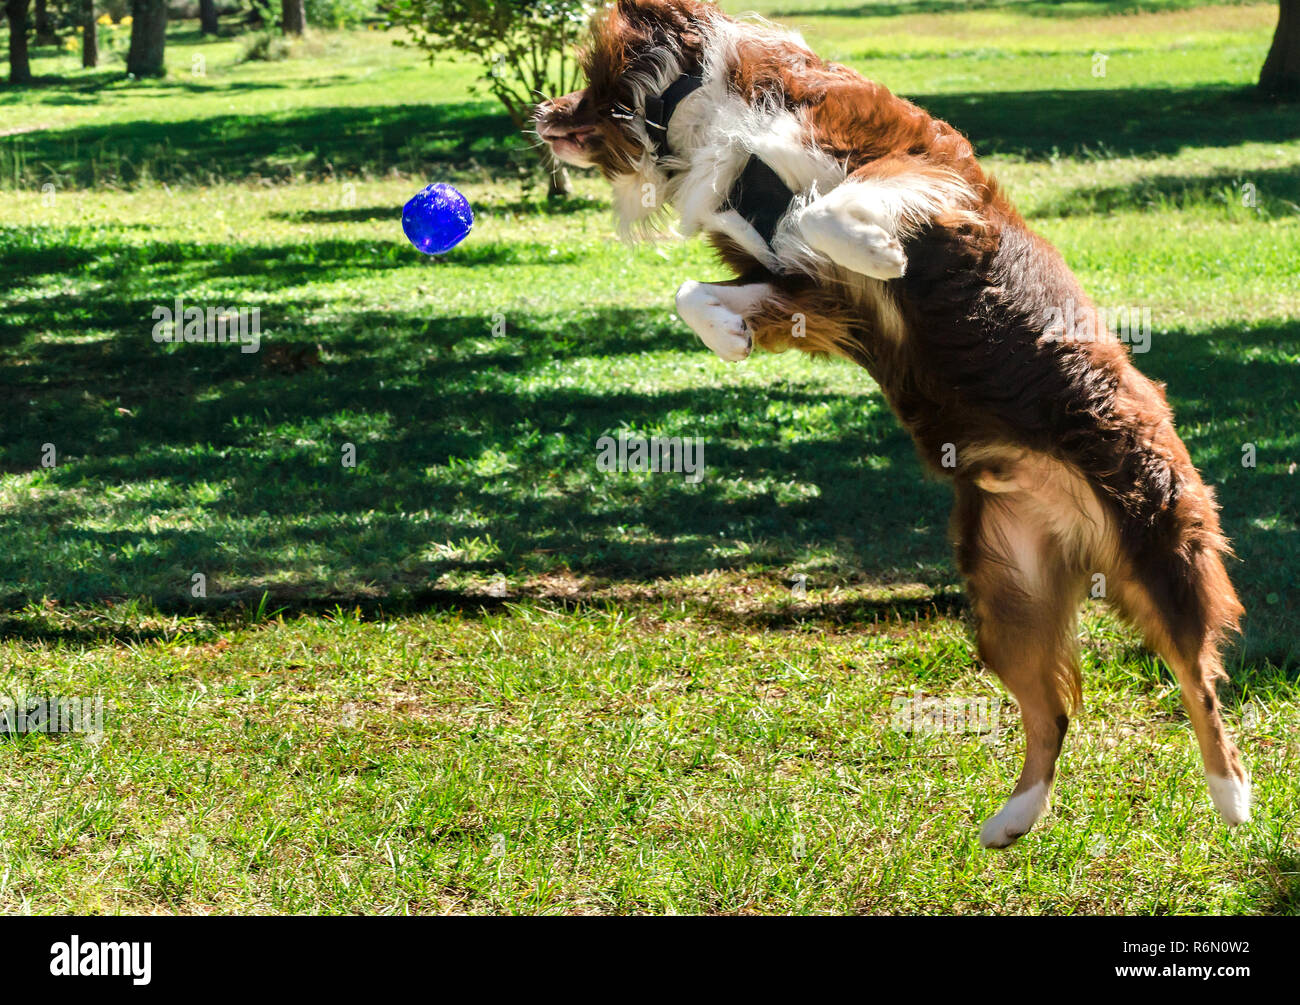 Cowboy, a six-year-old, red tri Australian Shepherd, leaps in the air to catch a Kong Squeezz ball, Oct. 14, 2014, in Coden, Alabama. Stock Photo